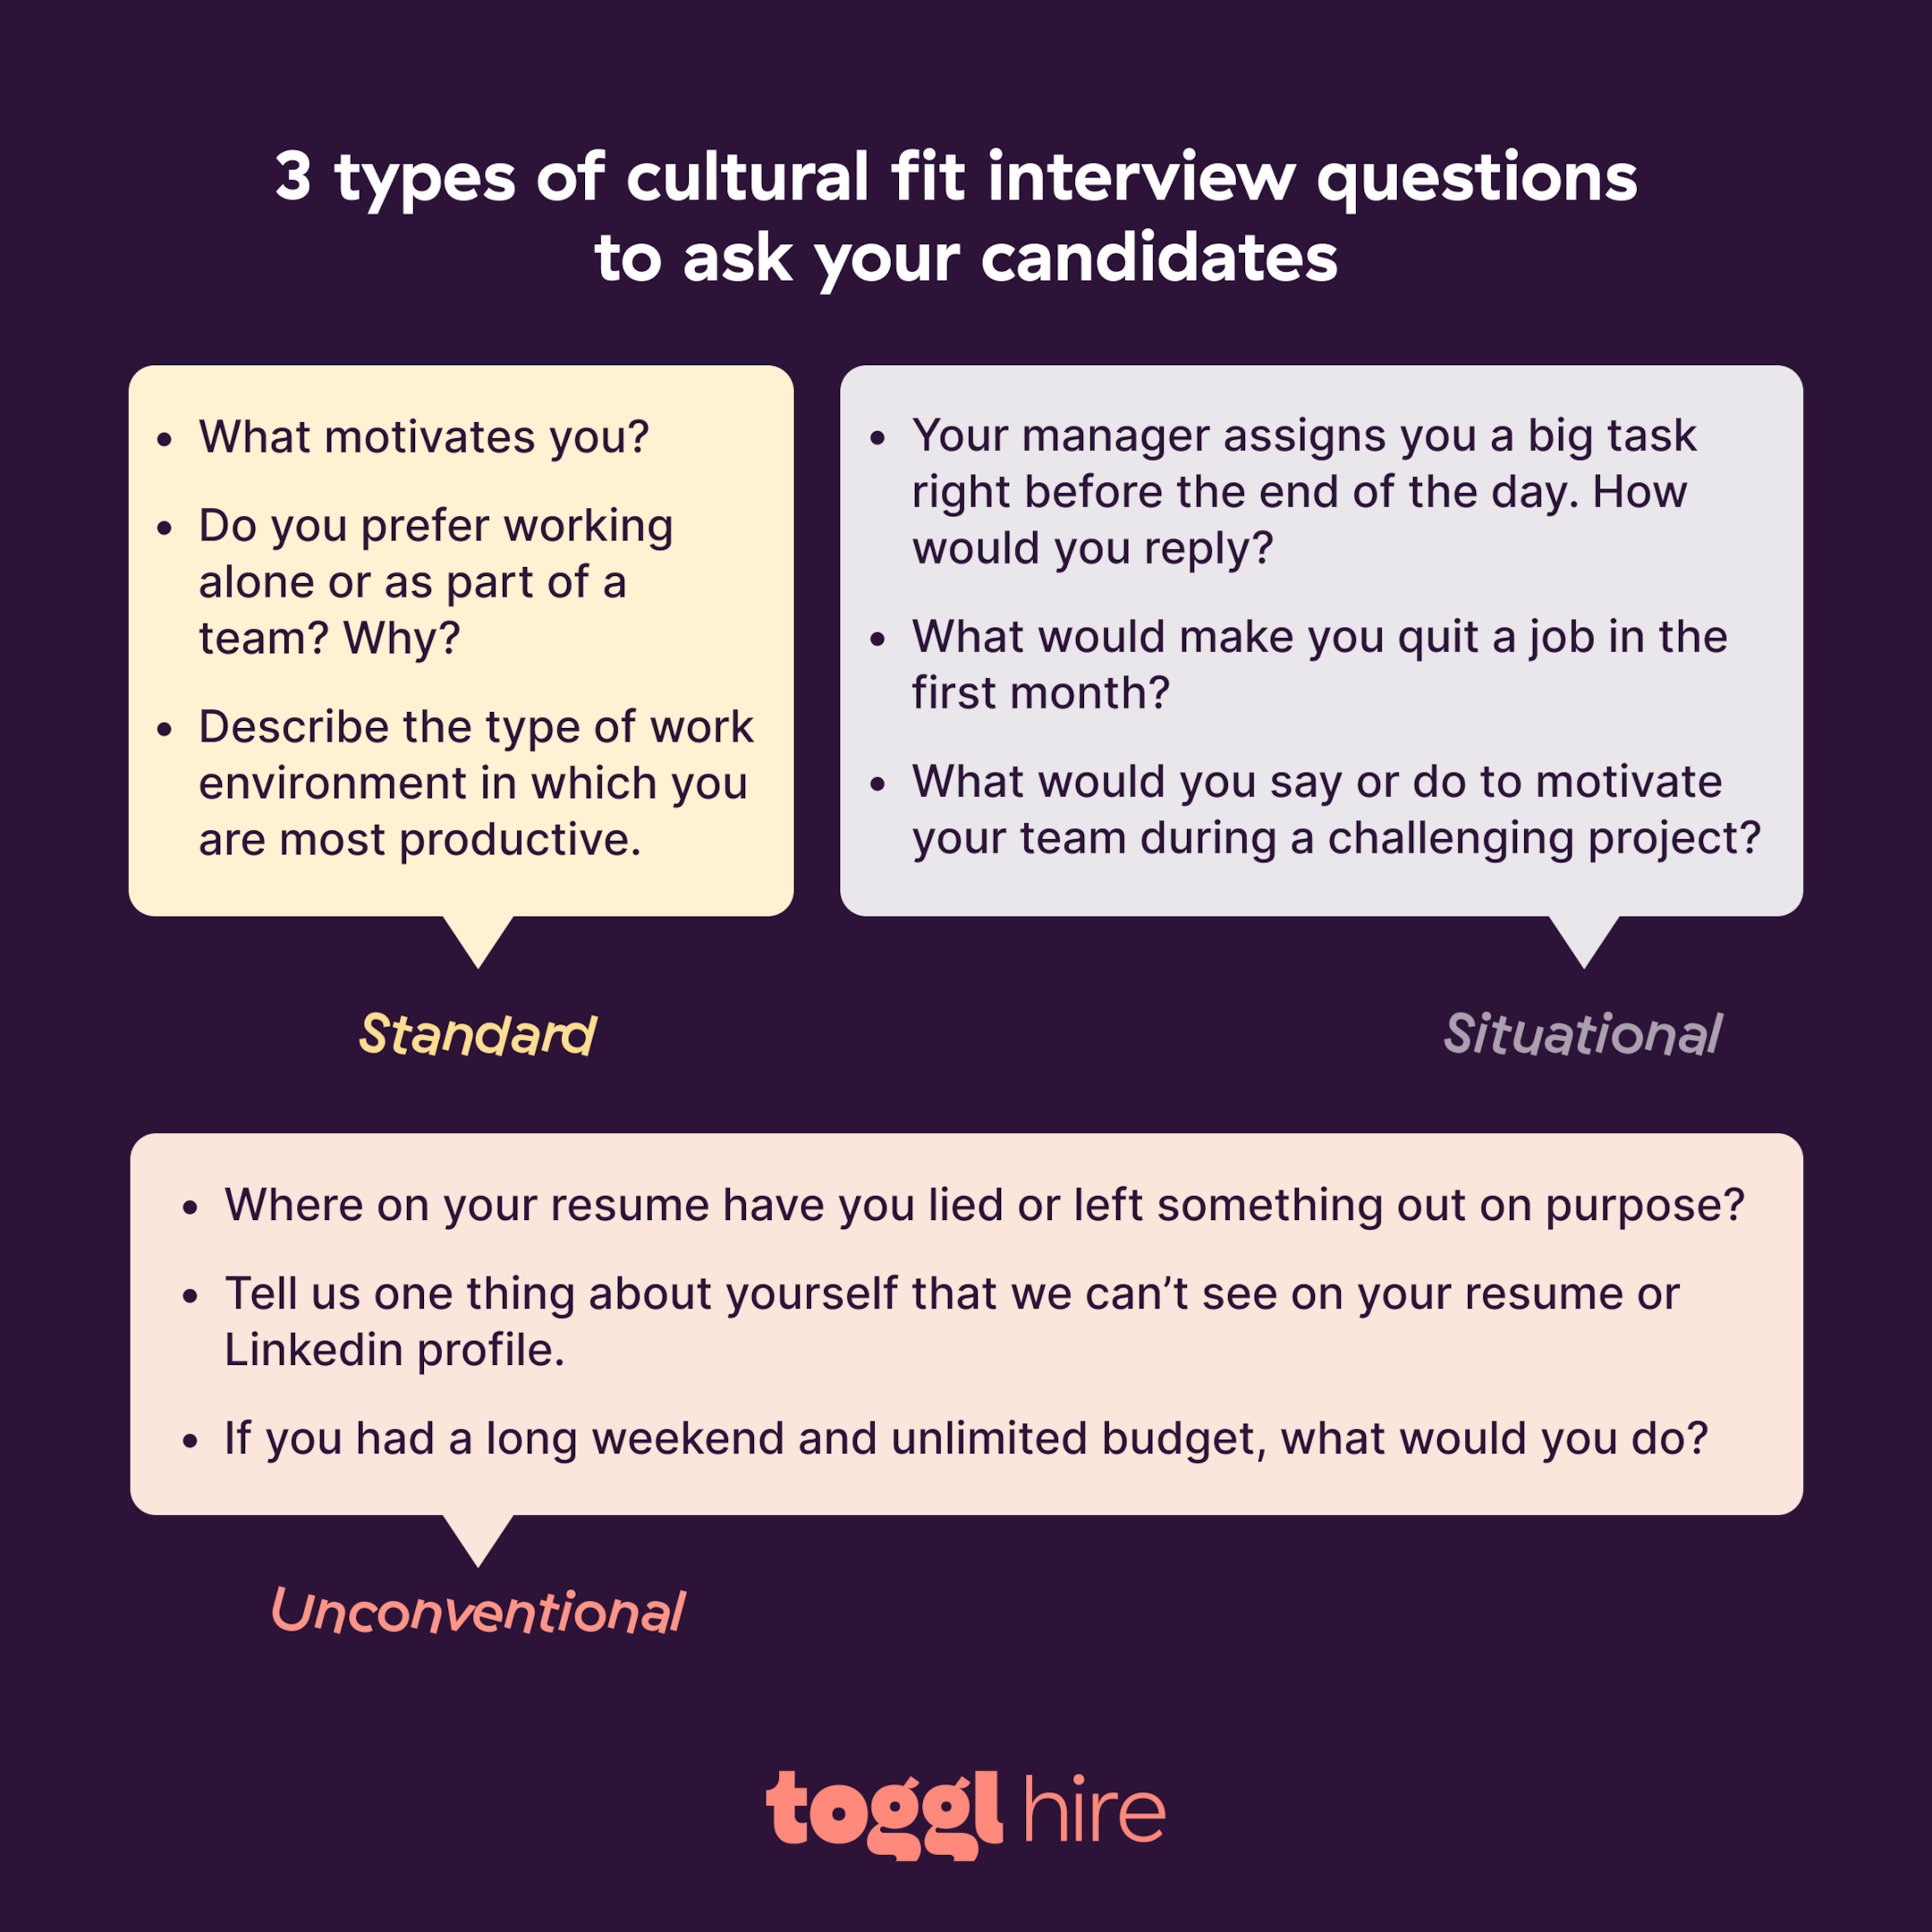 Questions to help you determing the cultural fit